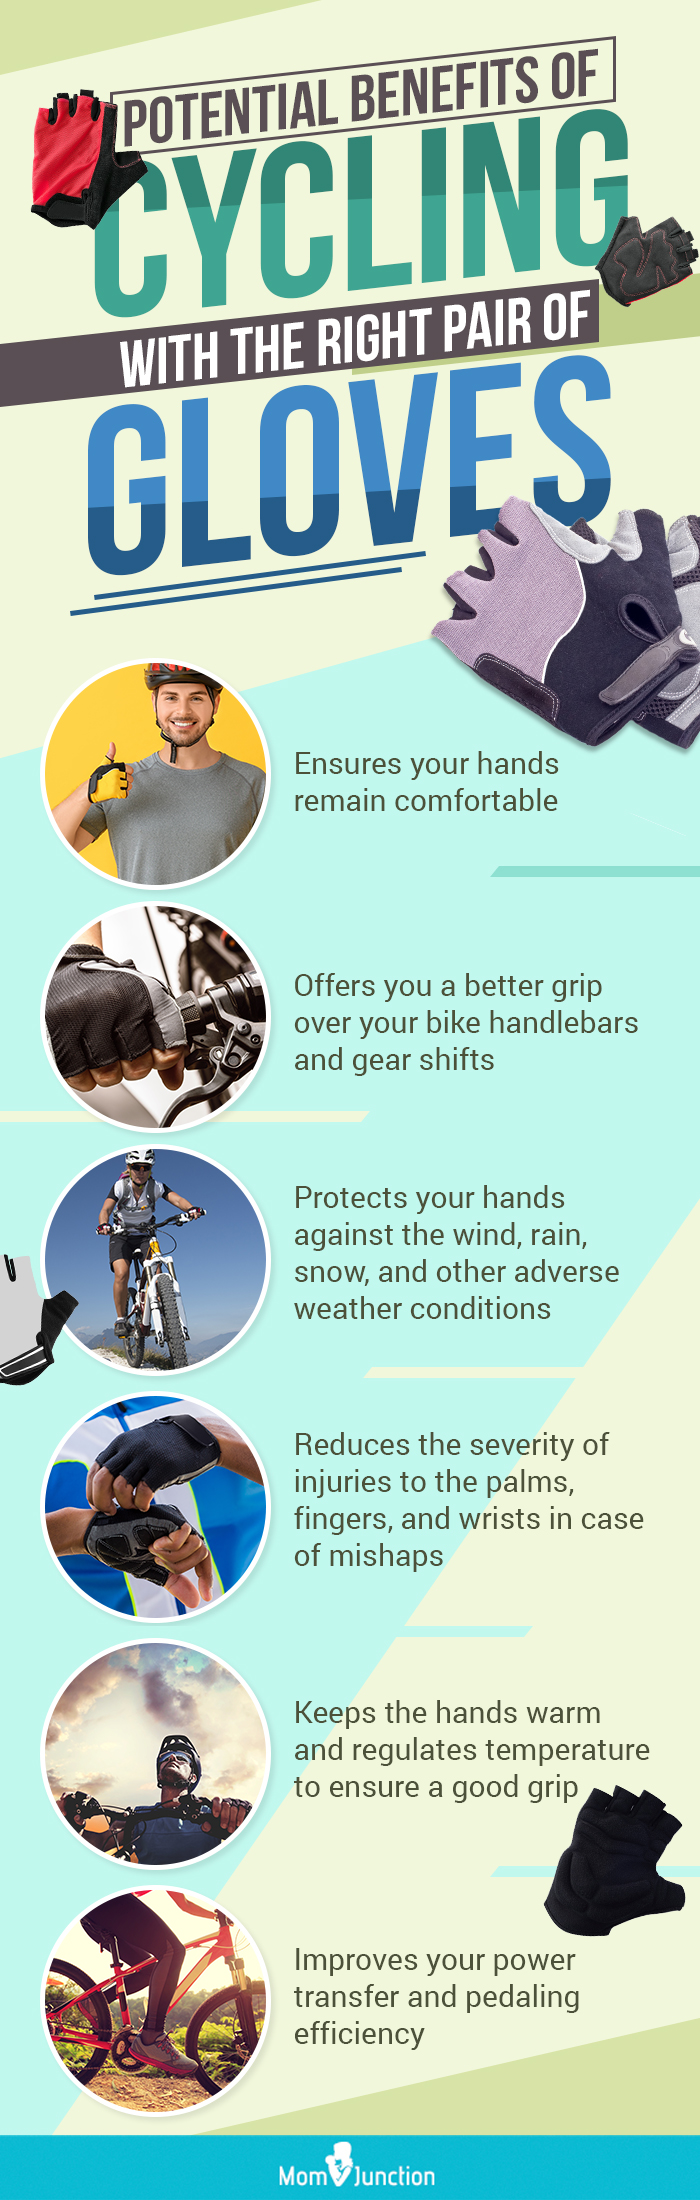 Potential Benefits Of Cycling With The Right Pair Of Gloves (infographic)